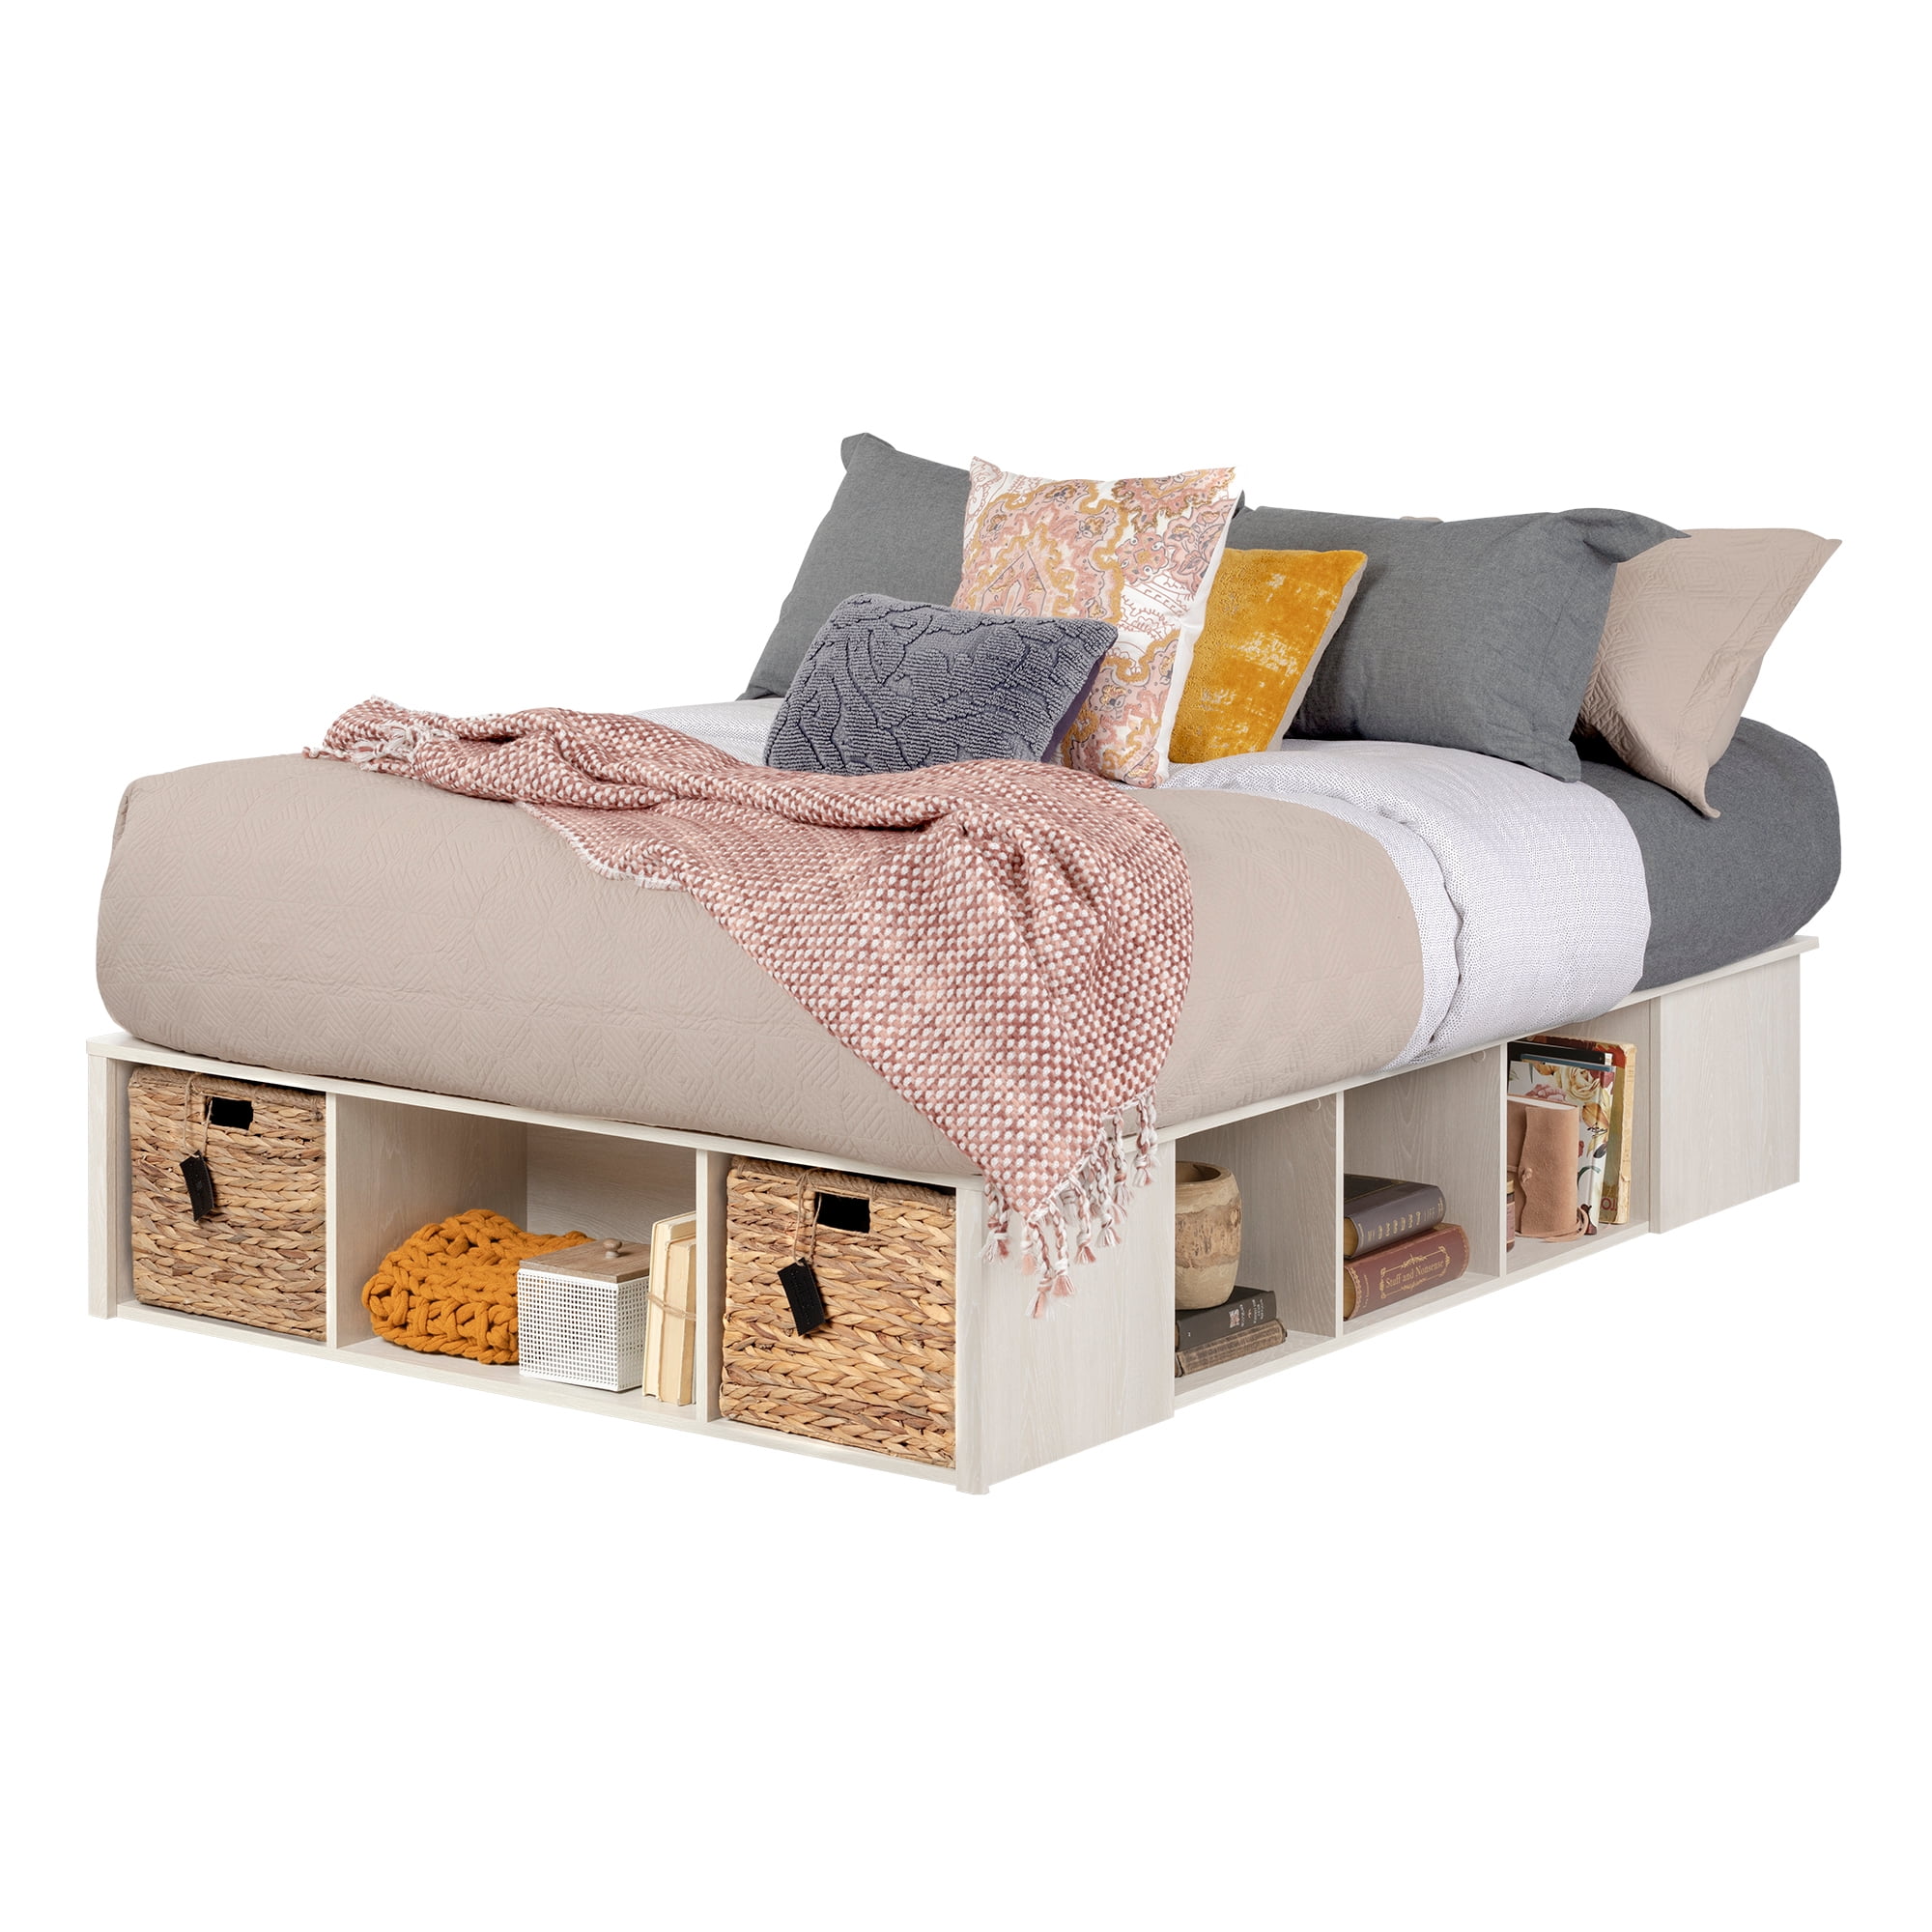 South Shore Lilak Storage Full size Bed with Baskets, Winter Oak and ...